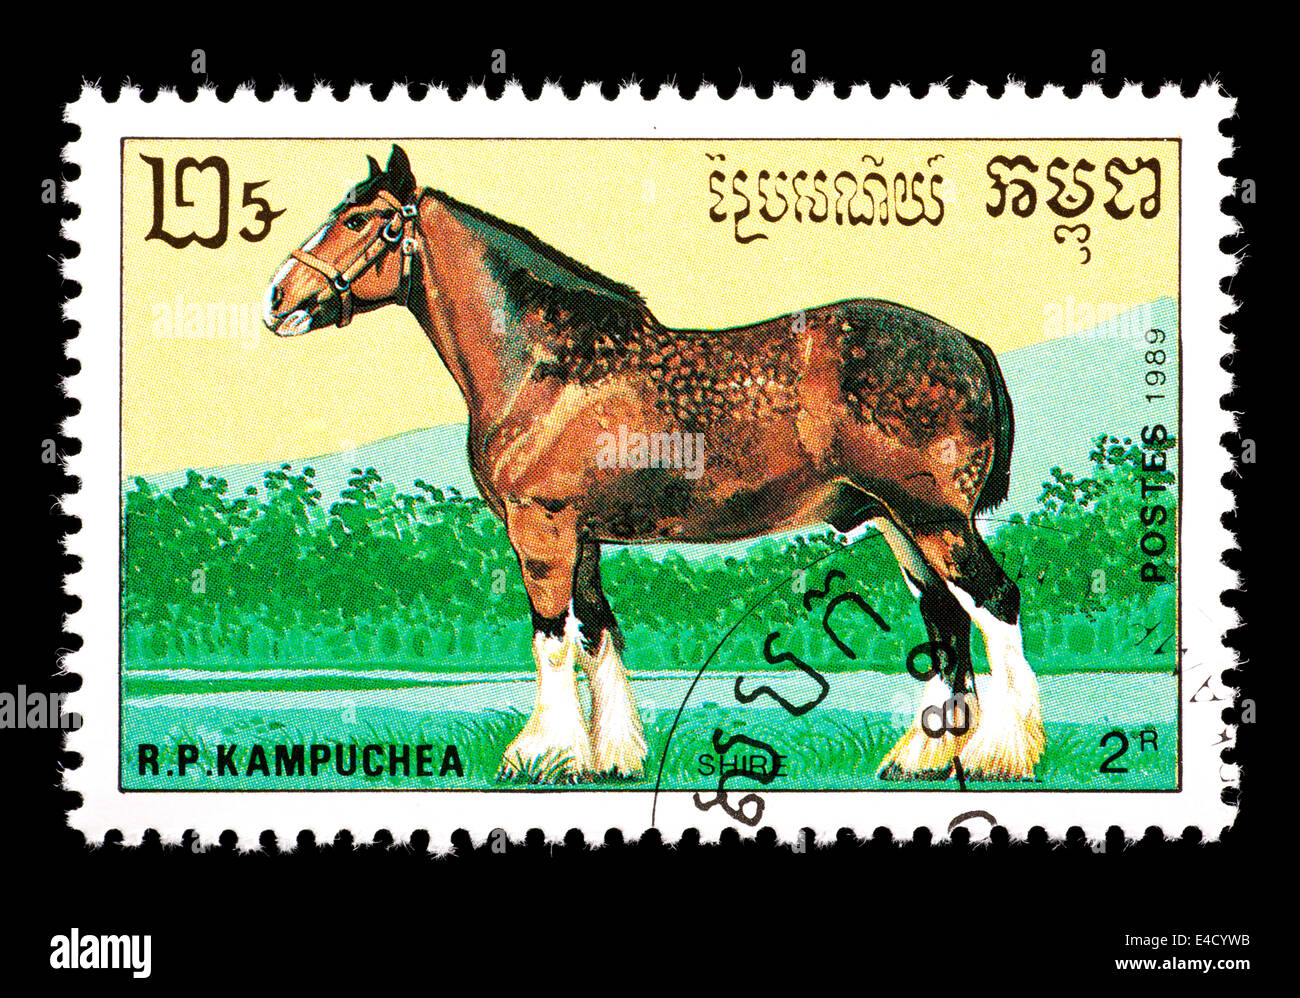 Postage stamp from Cambodia (Kampuchea) depicting a Shire draft horse. Stock Photo